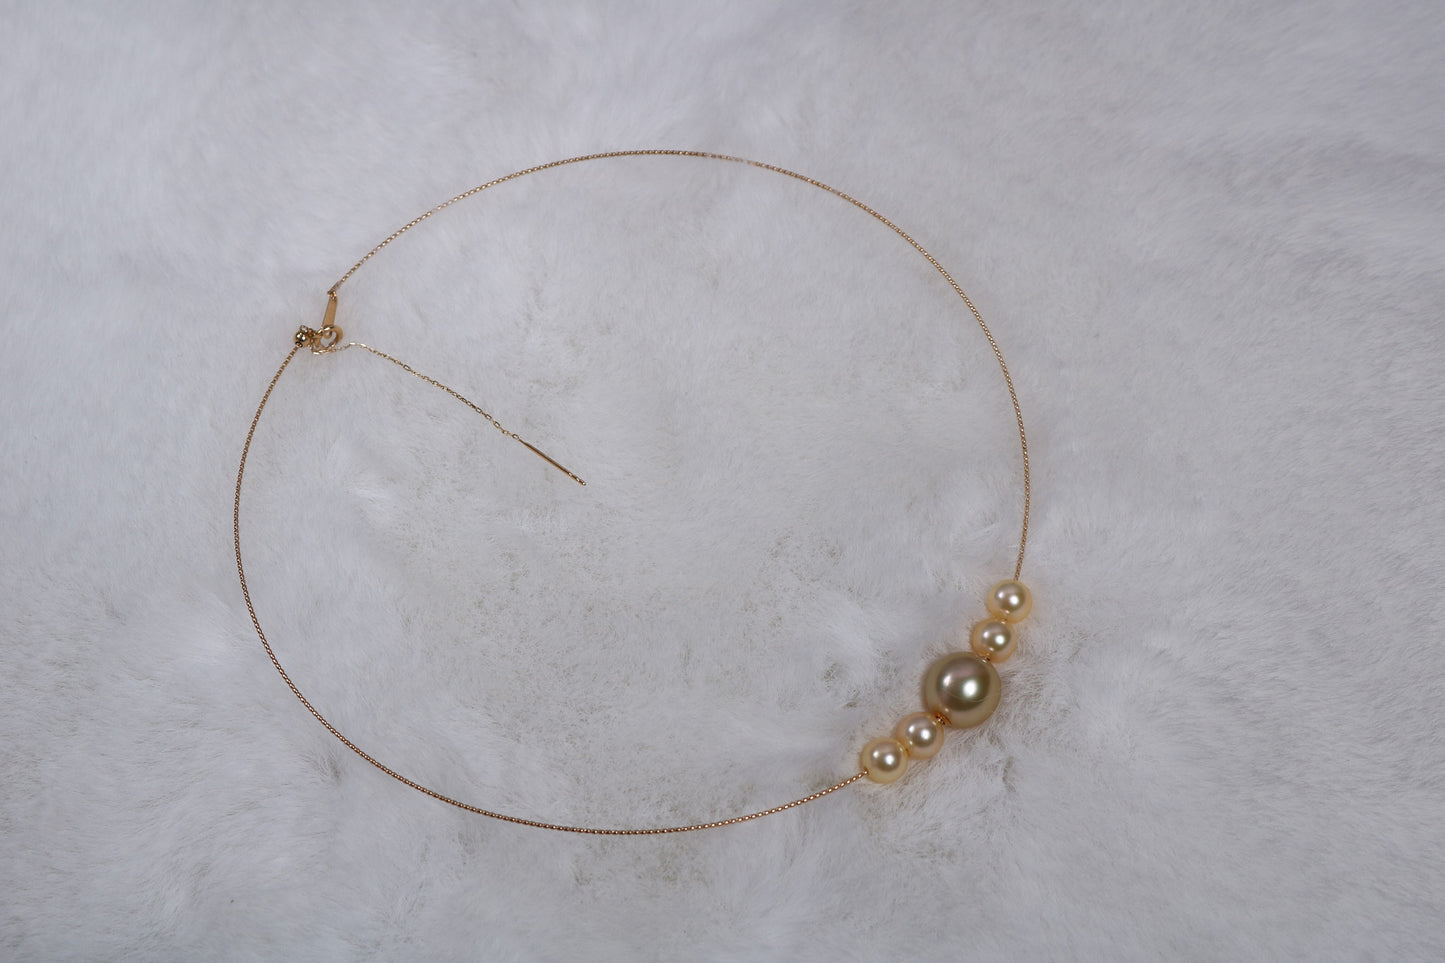 Golden South Sea Pearl and Golden Japanese Akoya Pearl Necklace